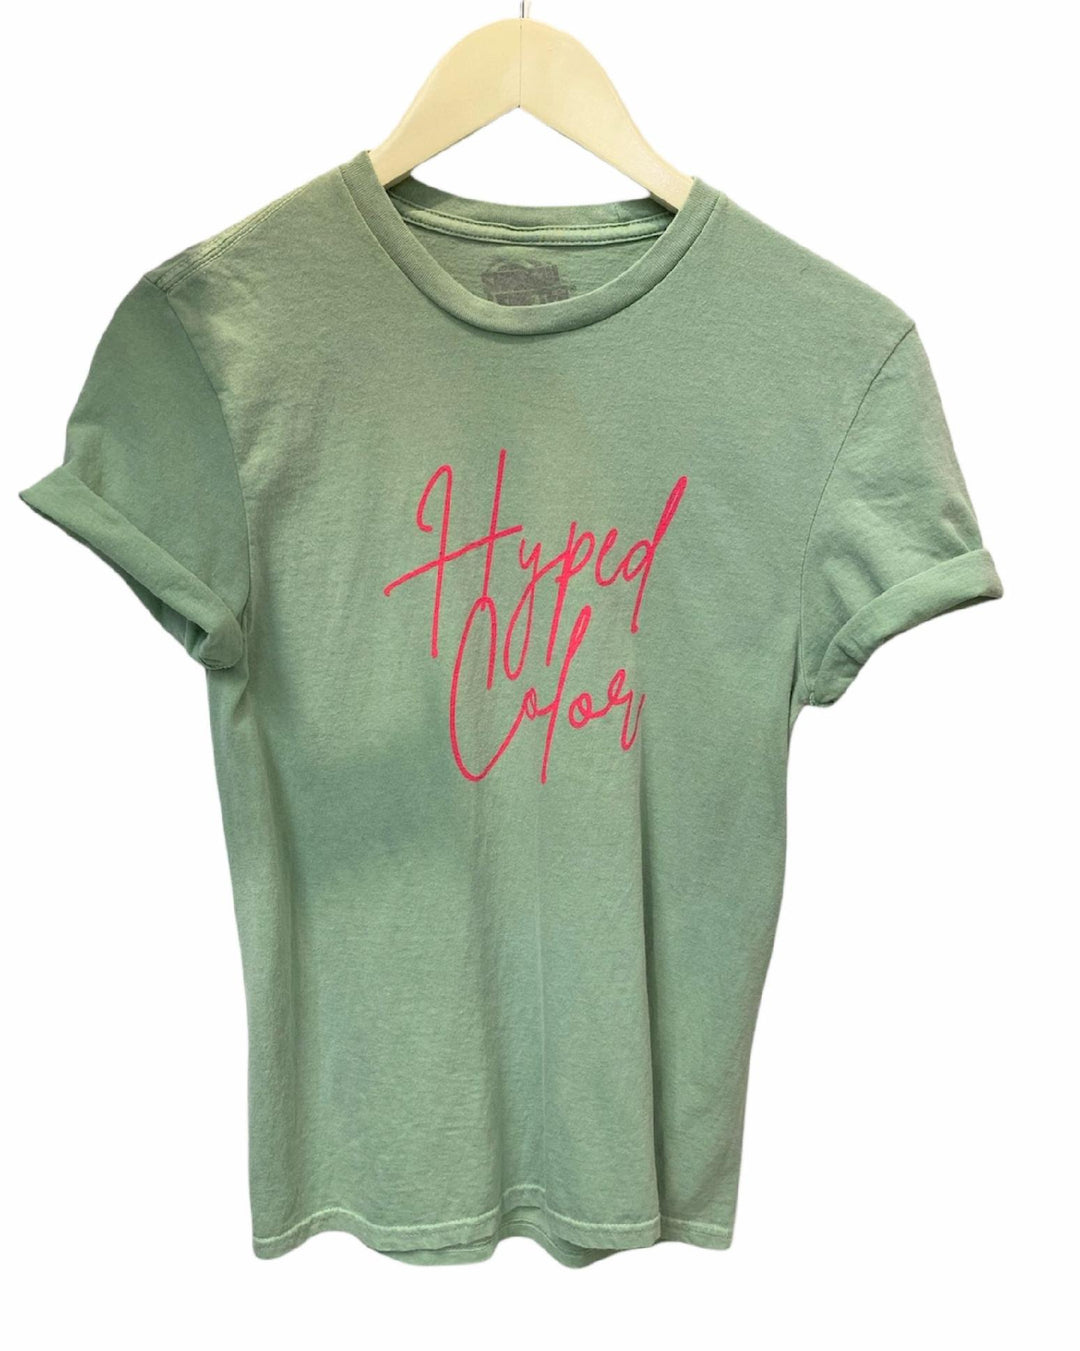 Green Hyped Color Tee